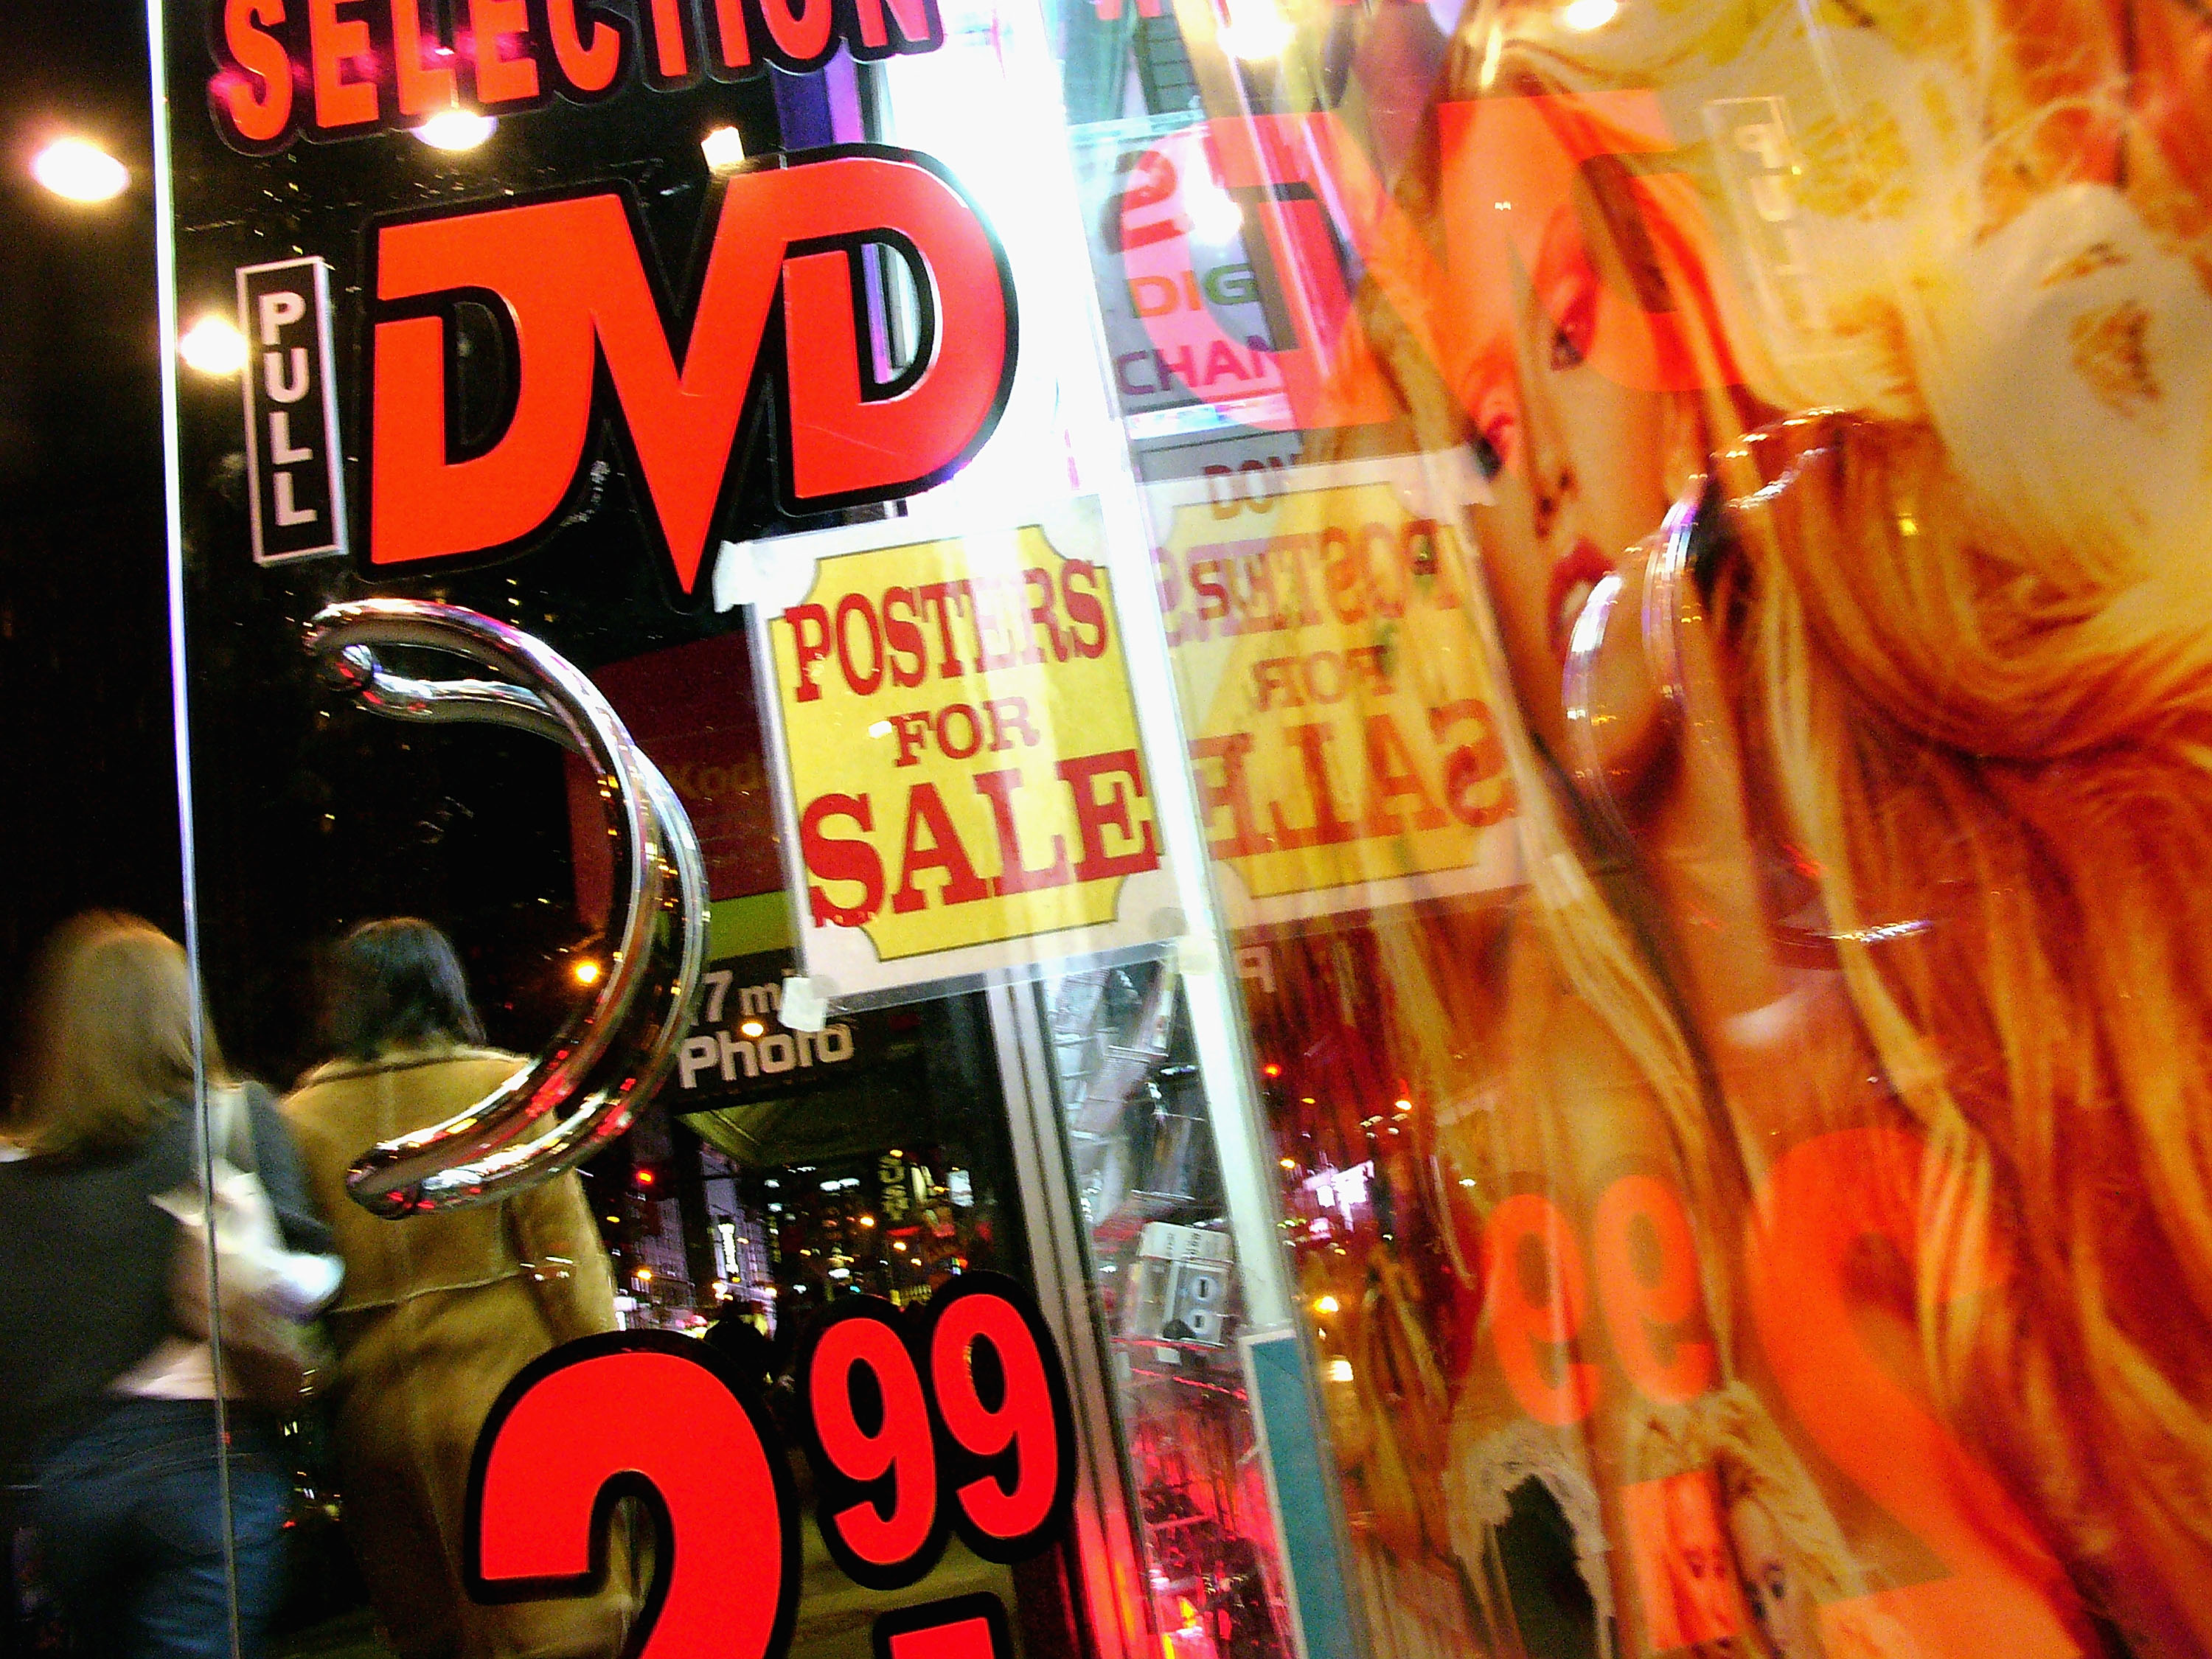 Pedestrians pass an adult video store in Times Square March 15, 2005 in New York City. (Photo by Spencer Platt/Getty Images)